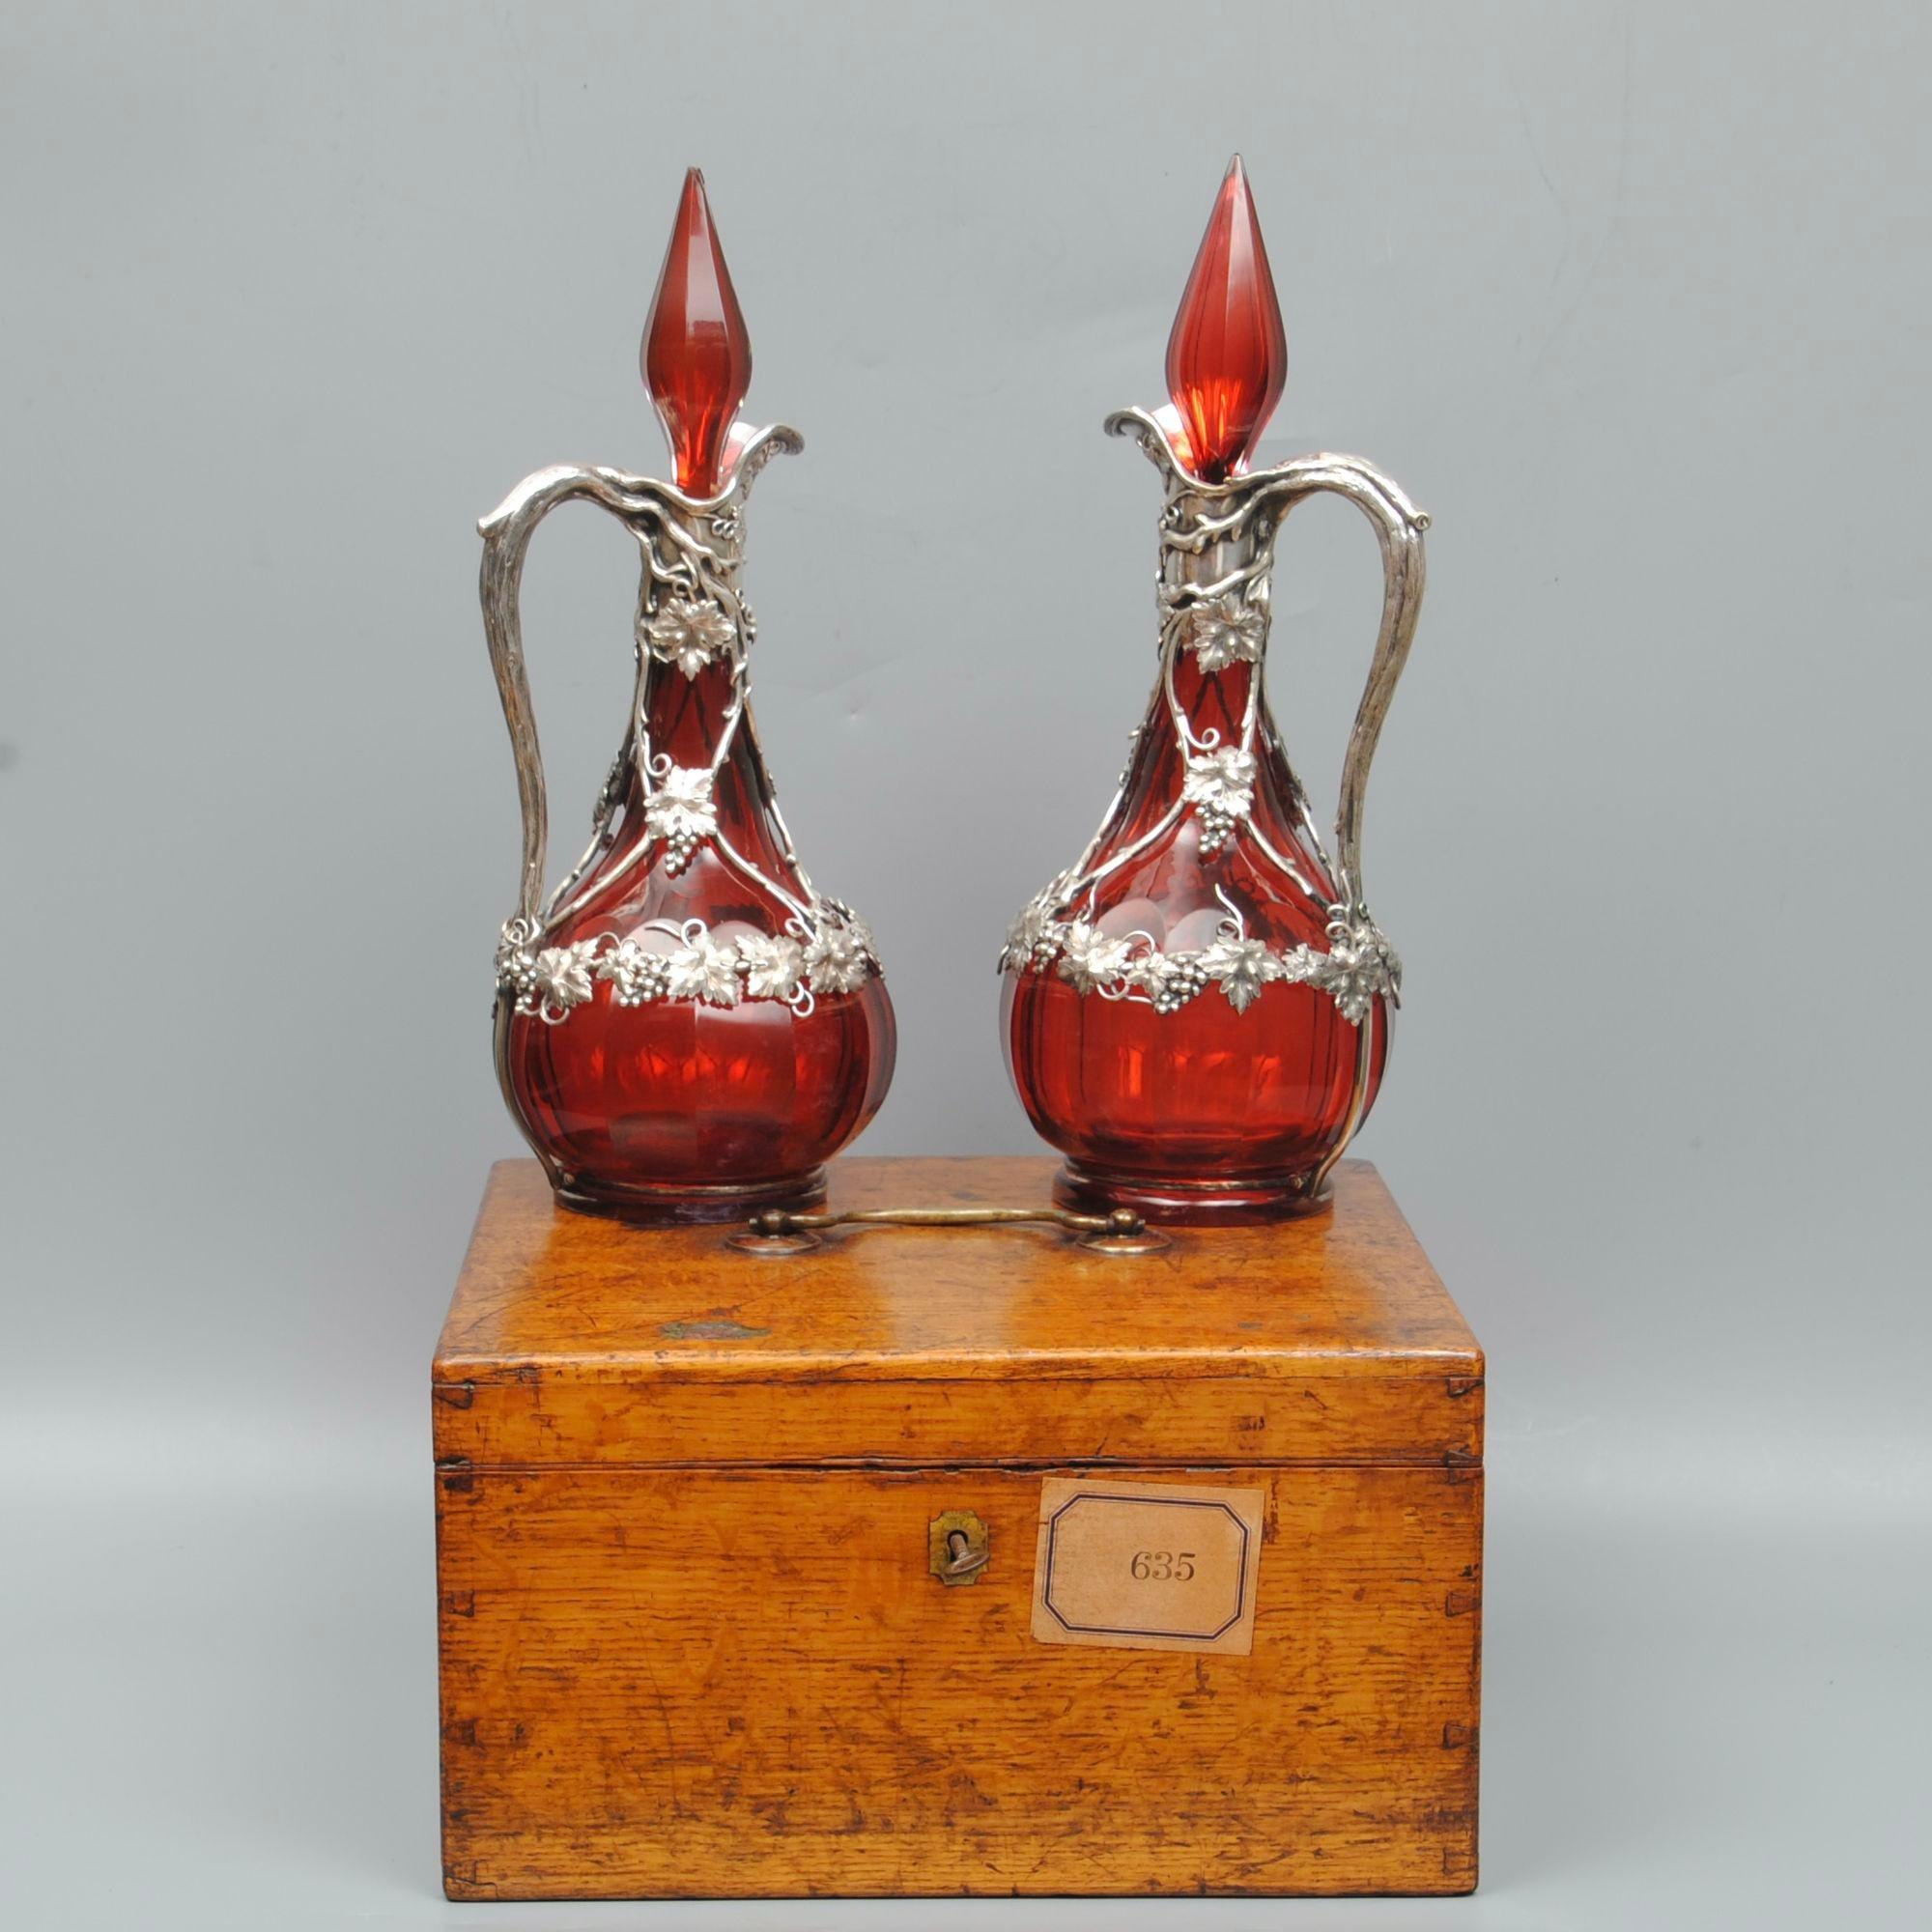 A fine pair of Ruby glass and white metal mounted claret jugs and stoppers (possibly by Elkingtons, sadly trade label from case is missing). The oak case is fitted to take both the jugs with separated place for the stoppers. The metal mounts and